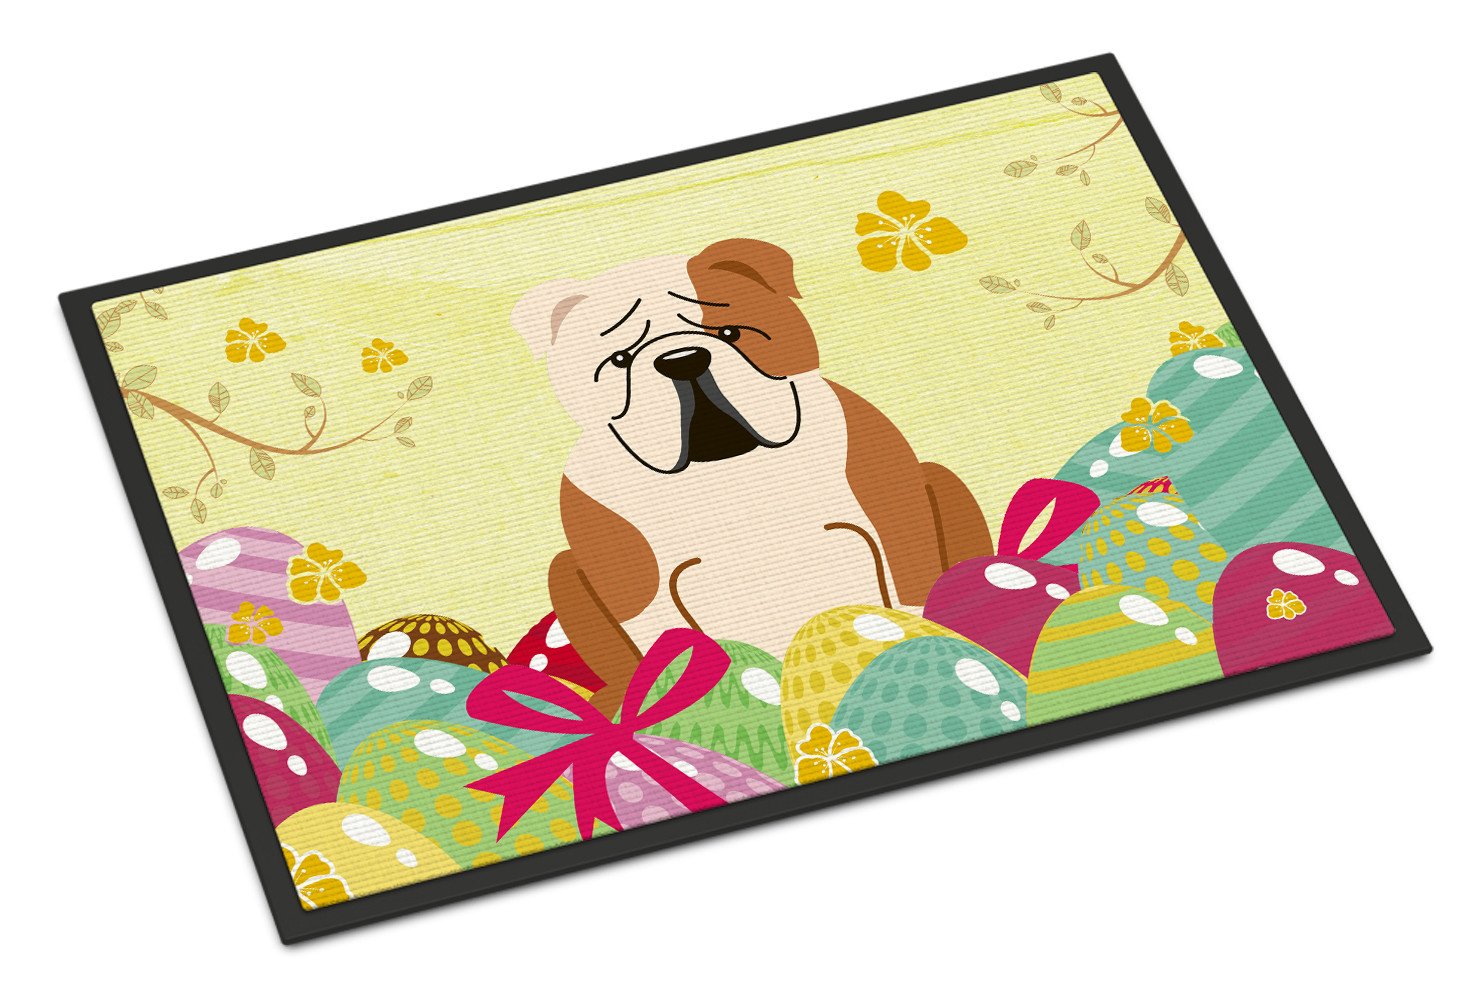 Easter Eggs English Bulldog Fawn White Indoor or Outdoor Mat 24x36 BB6125JMAT by Caroline's Treasures